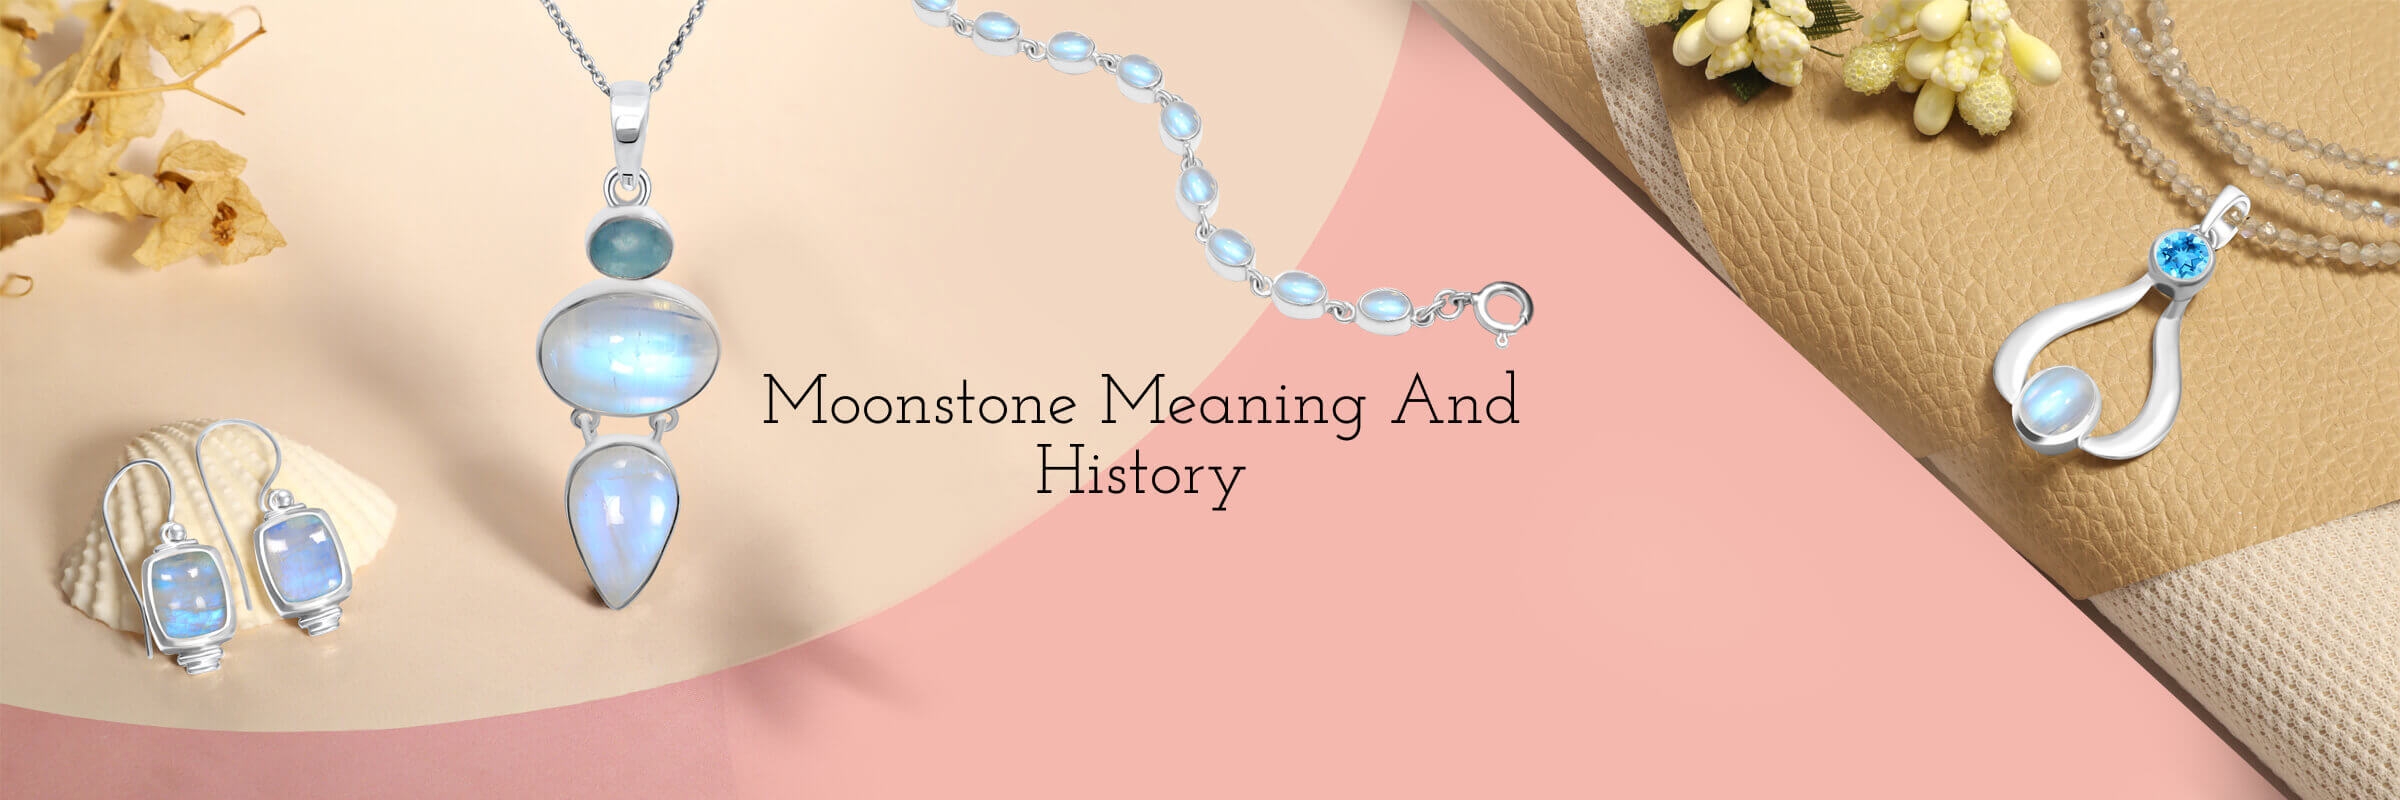 Meaning And History Of Moonstone